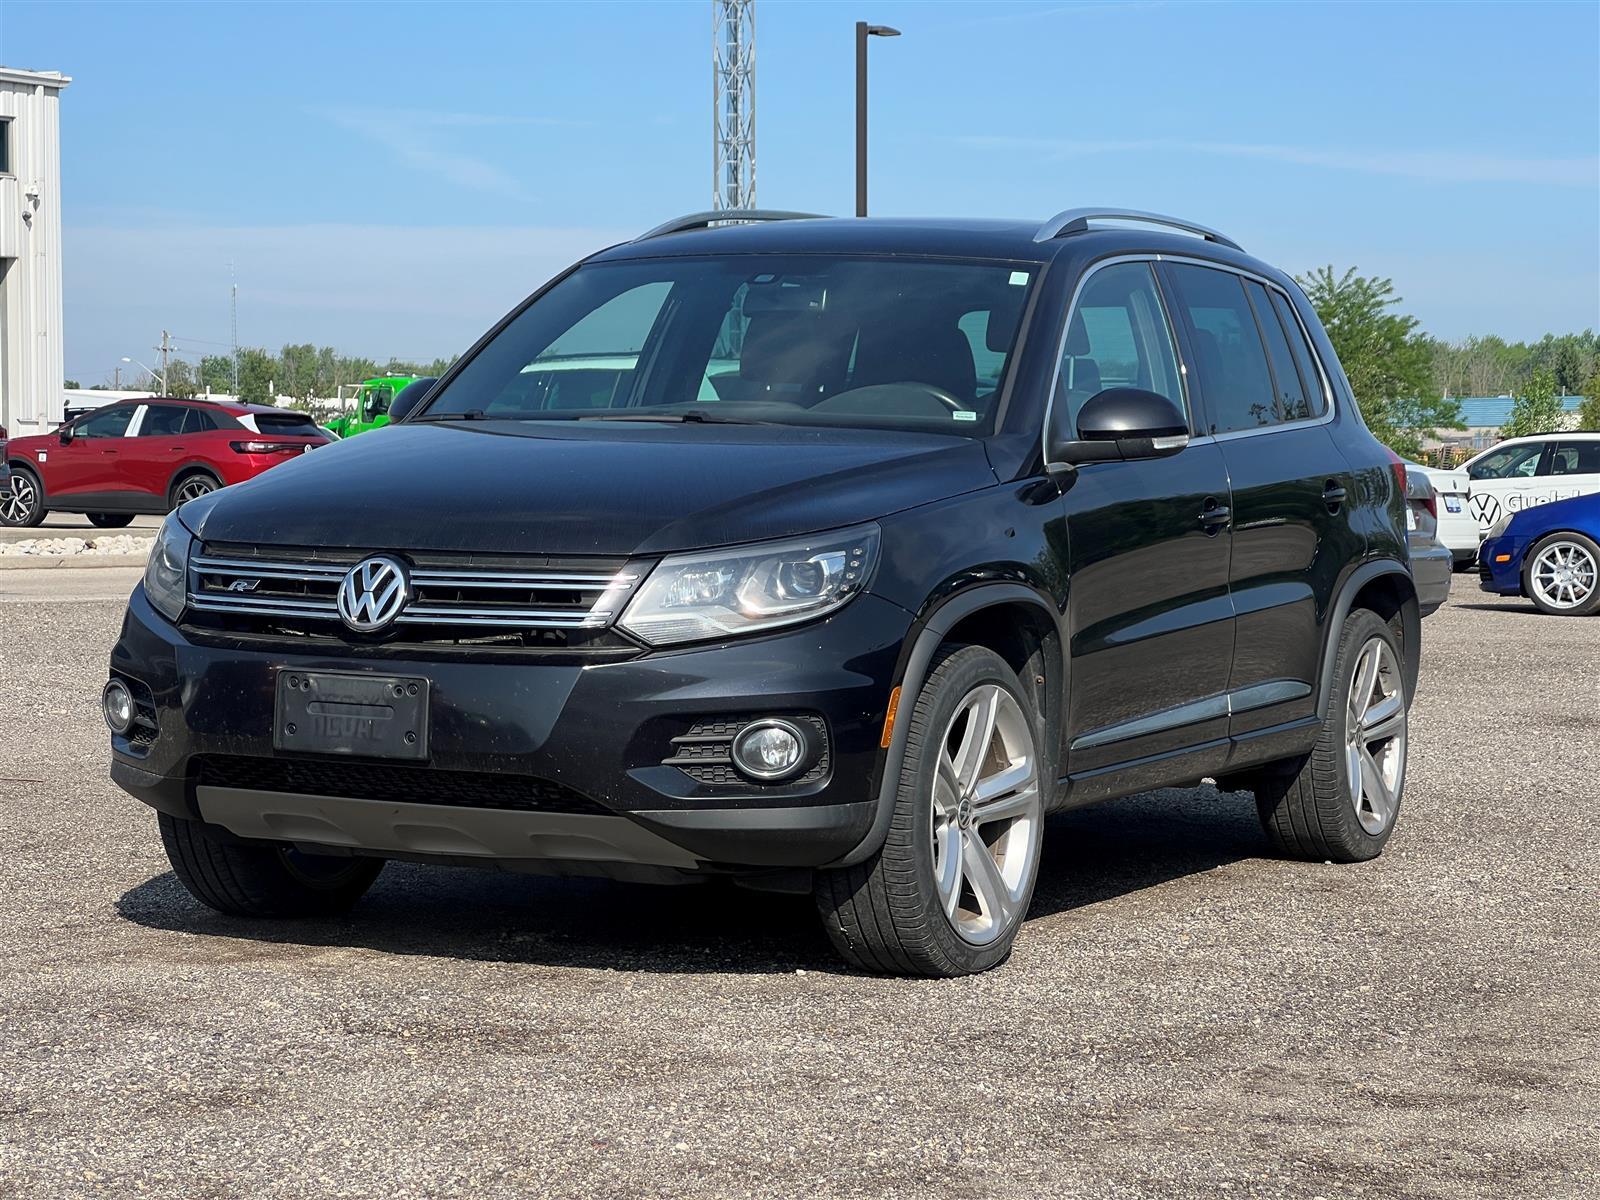 2015 Volkswagen Tiguan R-Line Technology Packages with 4Motion